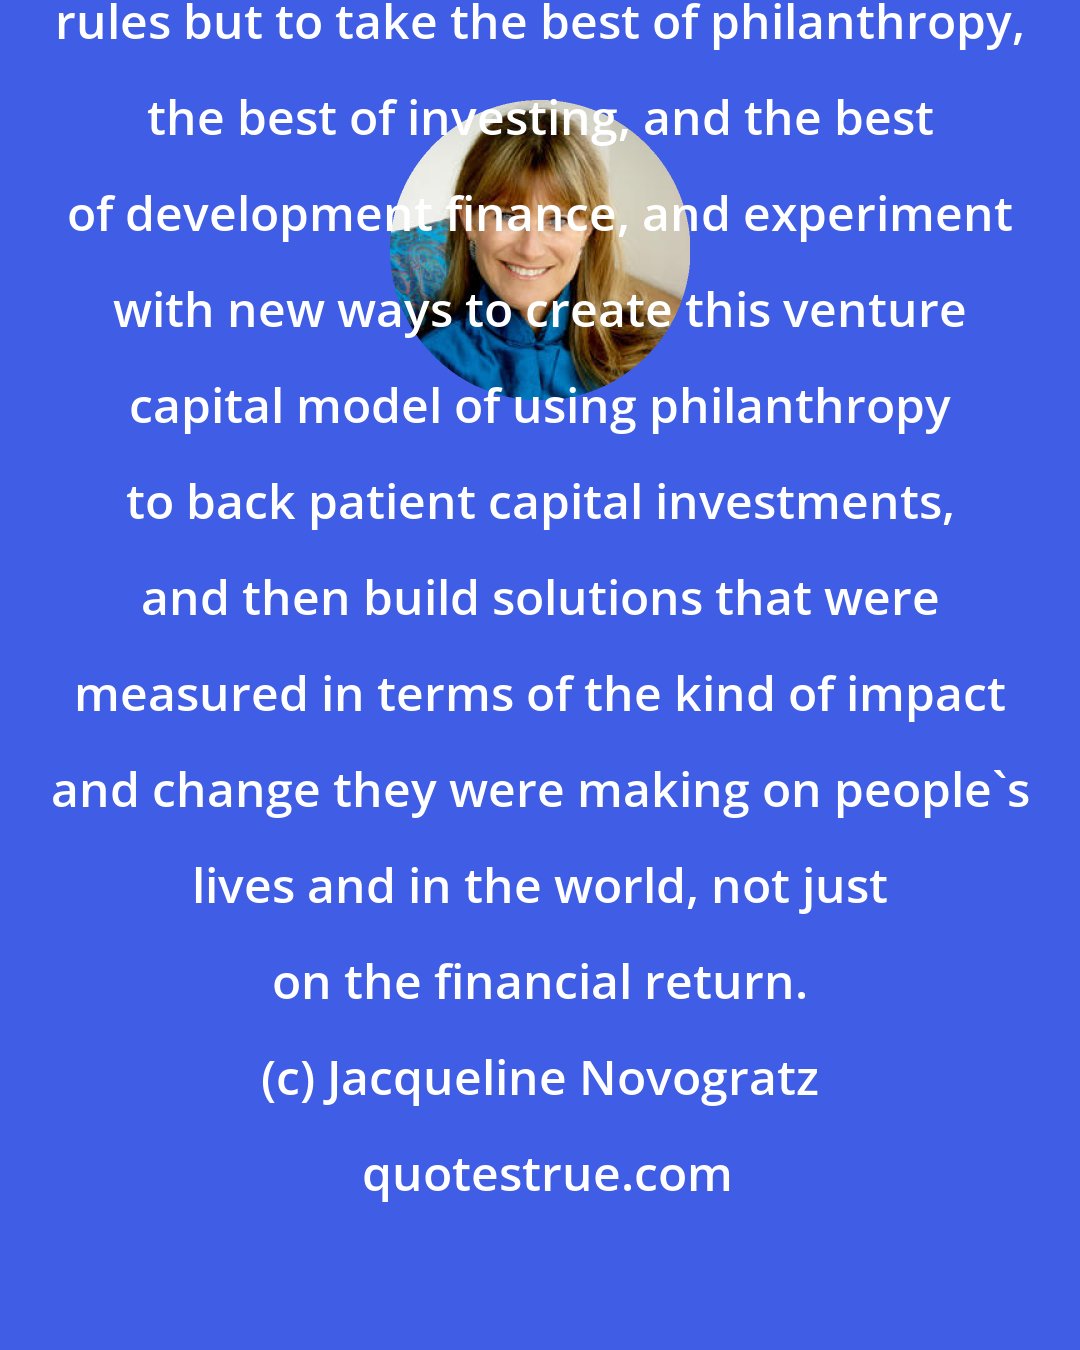 Jacqueline Novogratz: I was encouraged to break all the rules but to take the best of philanthropy, the best of investing, and the best of development finance, and experiment with new ways to create this venture capital model of using philanthropy to back patient capital investments, and then build solutions that were measured in terms of the kind of impact and change they were making on people's lives and in the world, not just on the financial return.